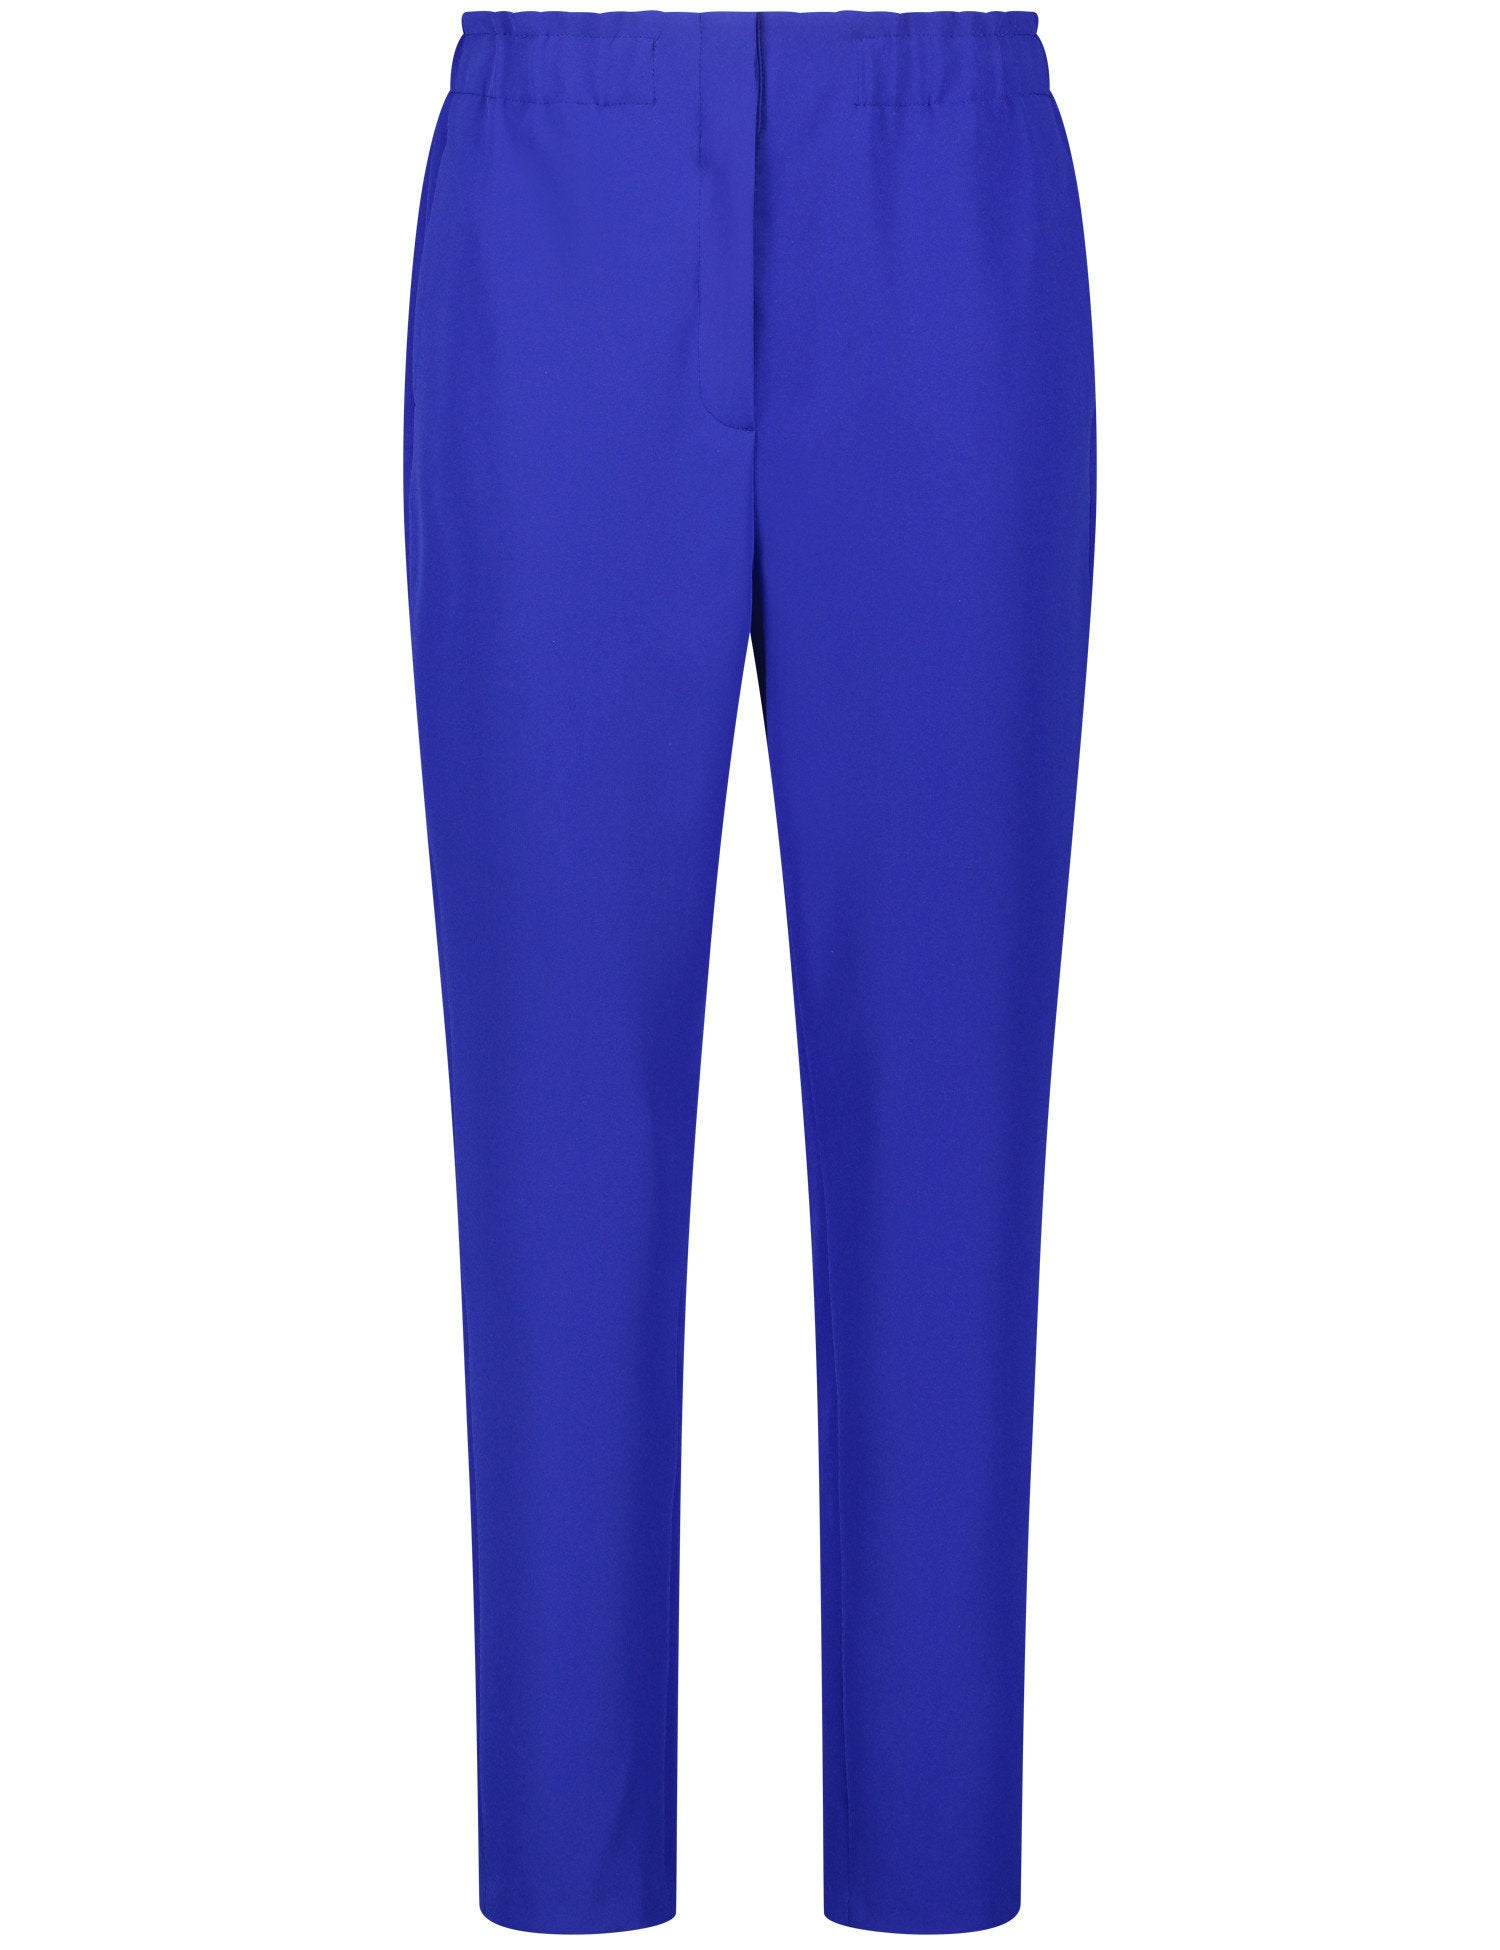 Flowing 7/8-Length Trousers In A Slim Fit_420430-11355_8790_02